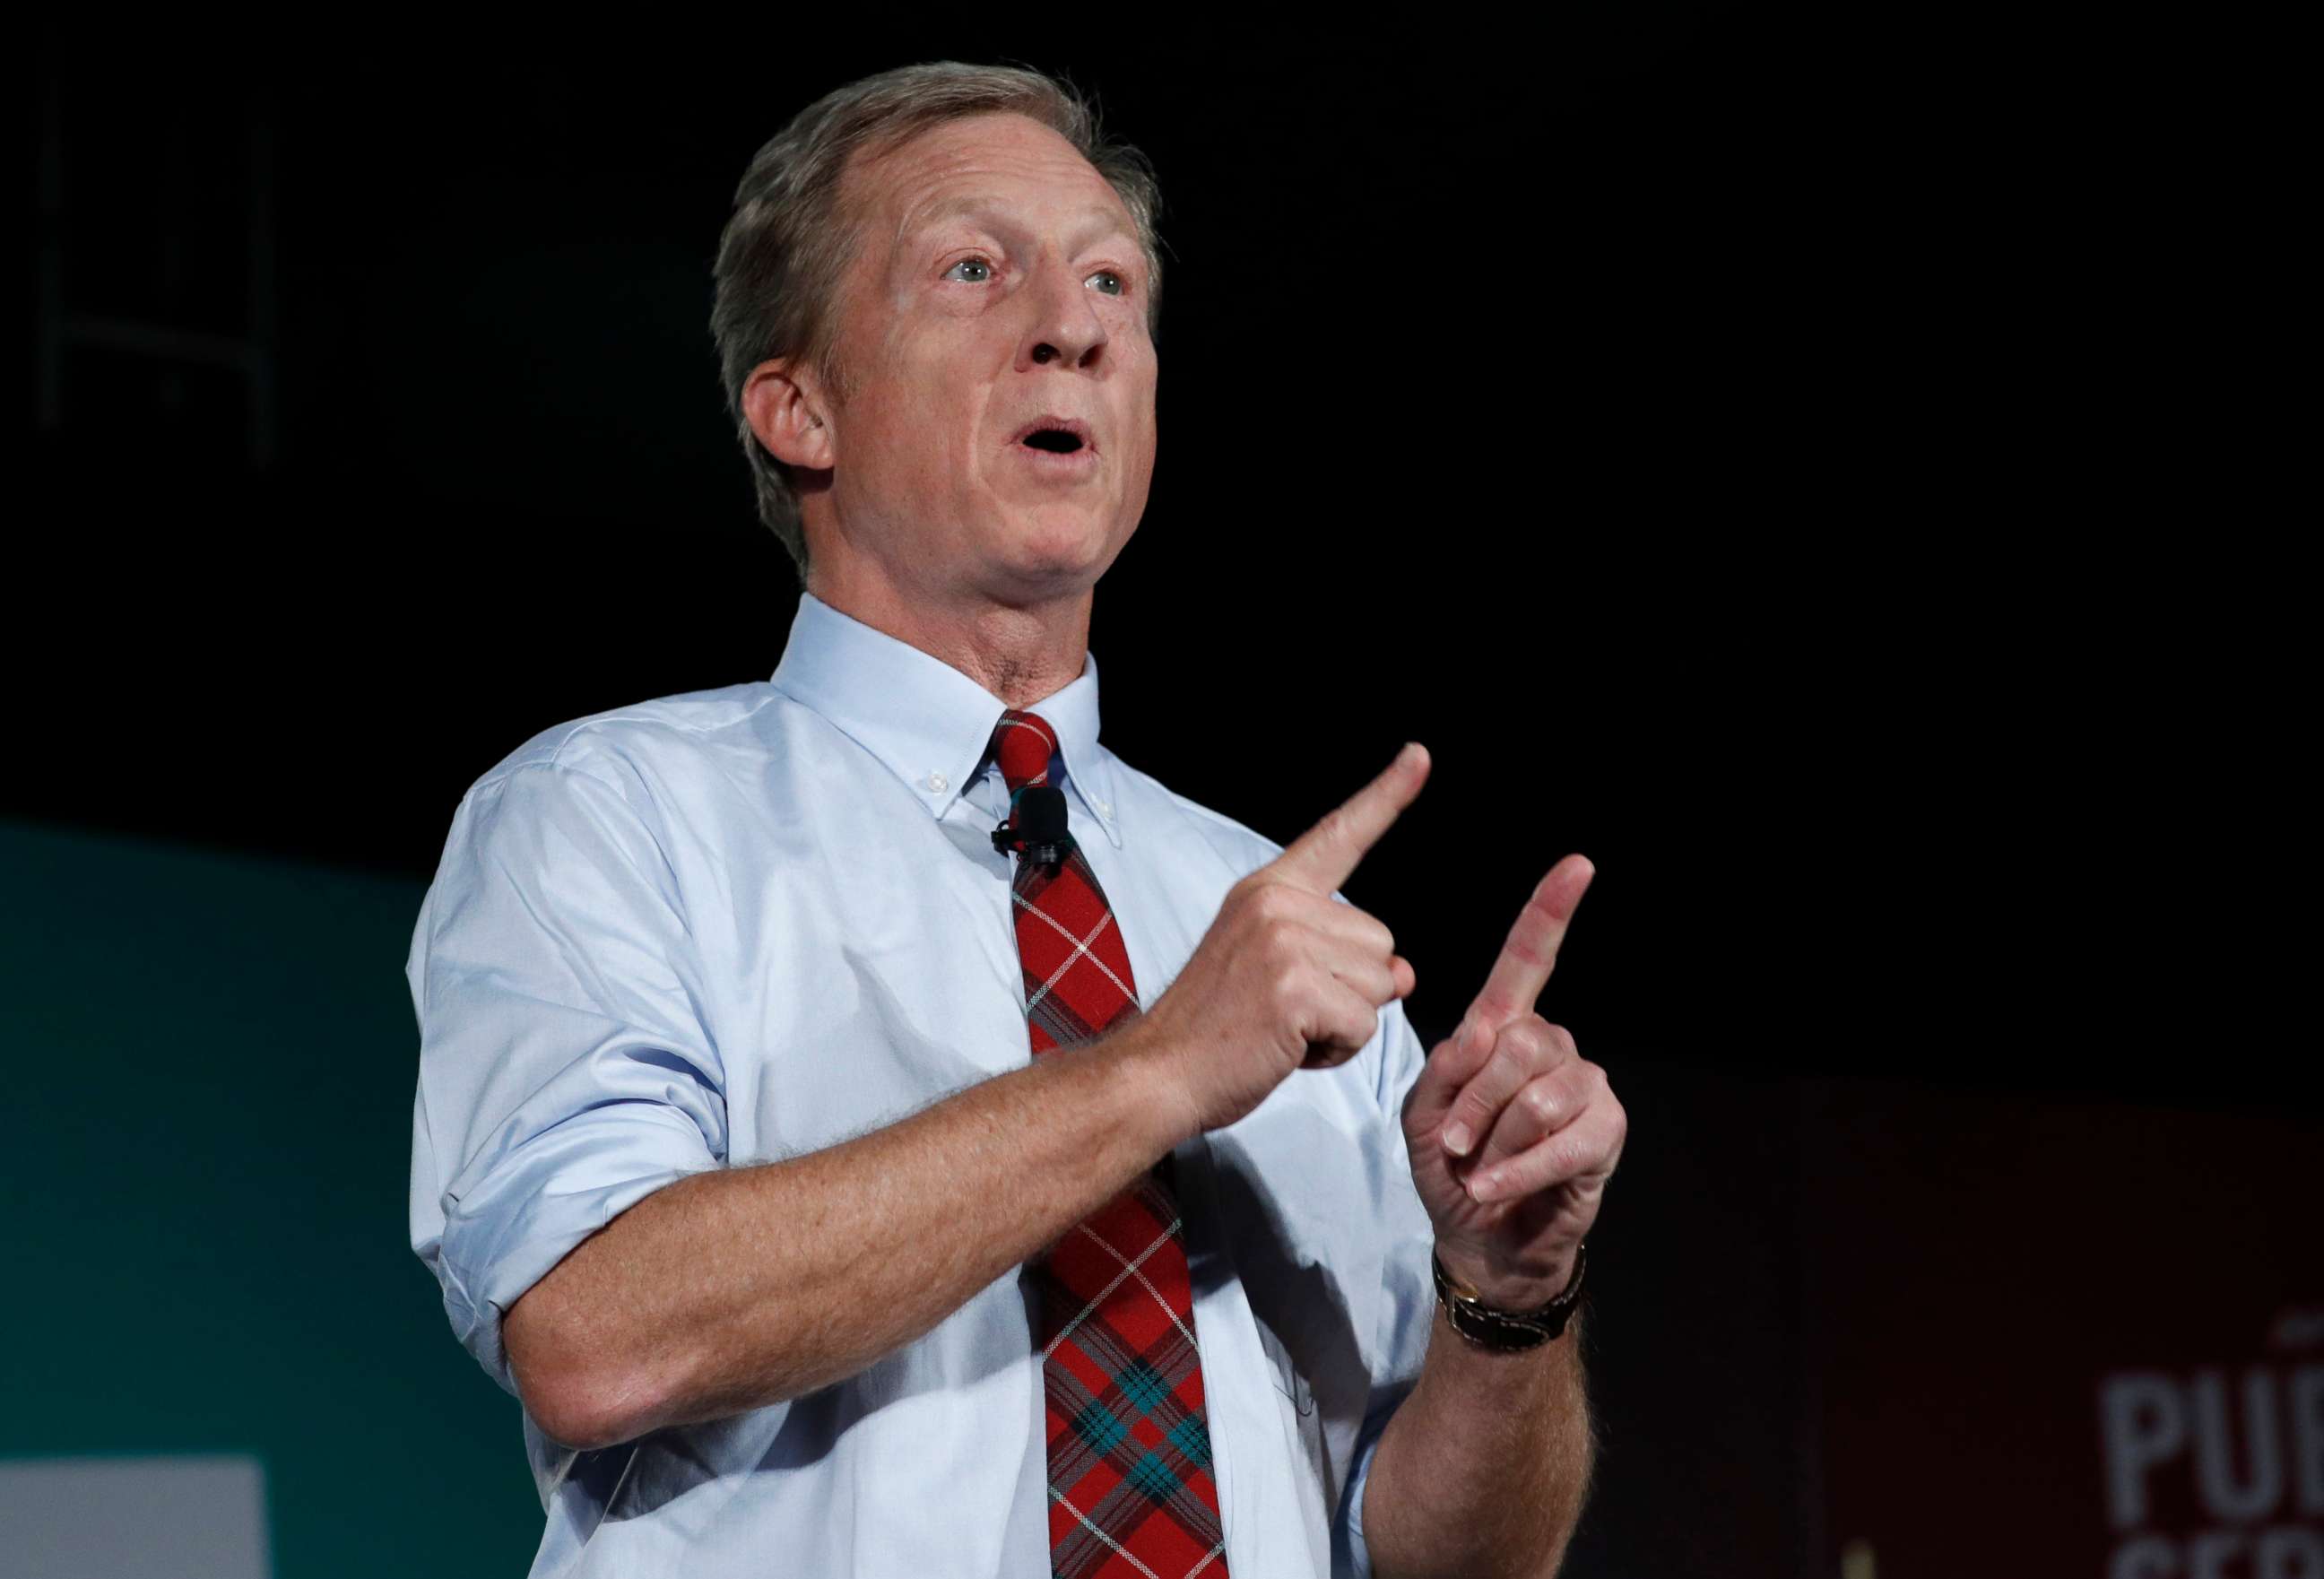 PHOTO: Democratic presidential candidate and businessman Tom Steyer speaks during a public employees union candidate forum, Aug. 3, 2019, in Las Vegas.